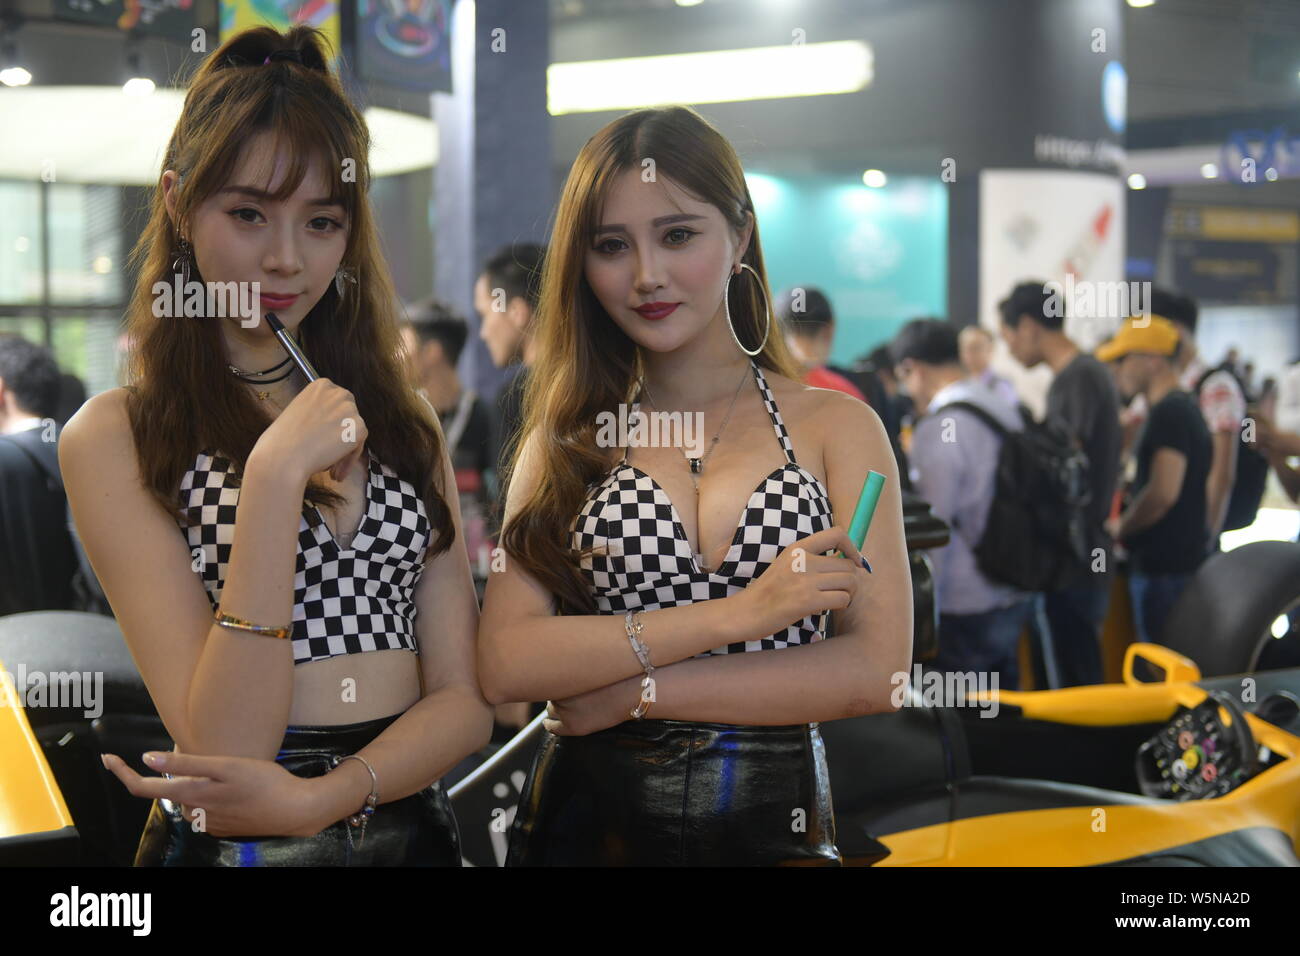 Showgirls display e-cigarettes the 2019 IECIE Shenzhen eCig Expo at Shenzhen Convention & Exhibition Center in Shenzhen city, south China's Guangdong Stock Photo